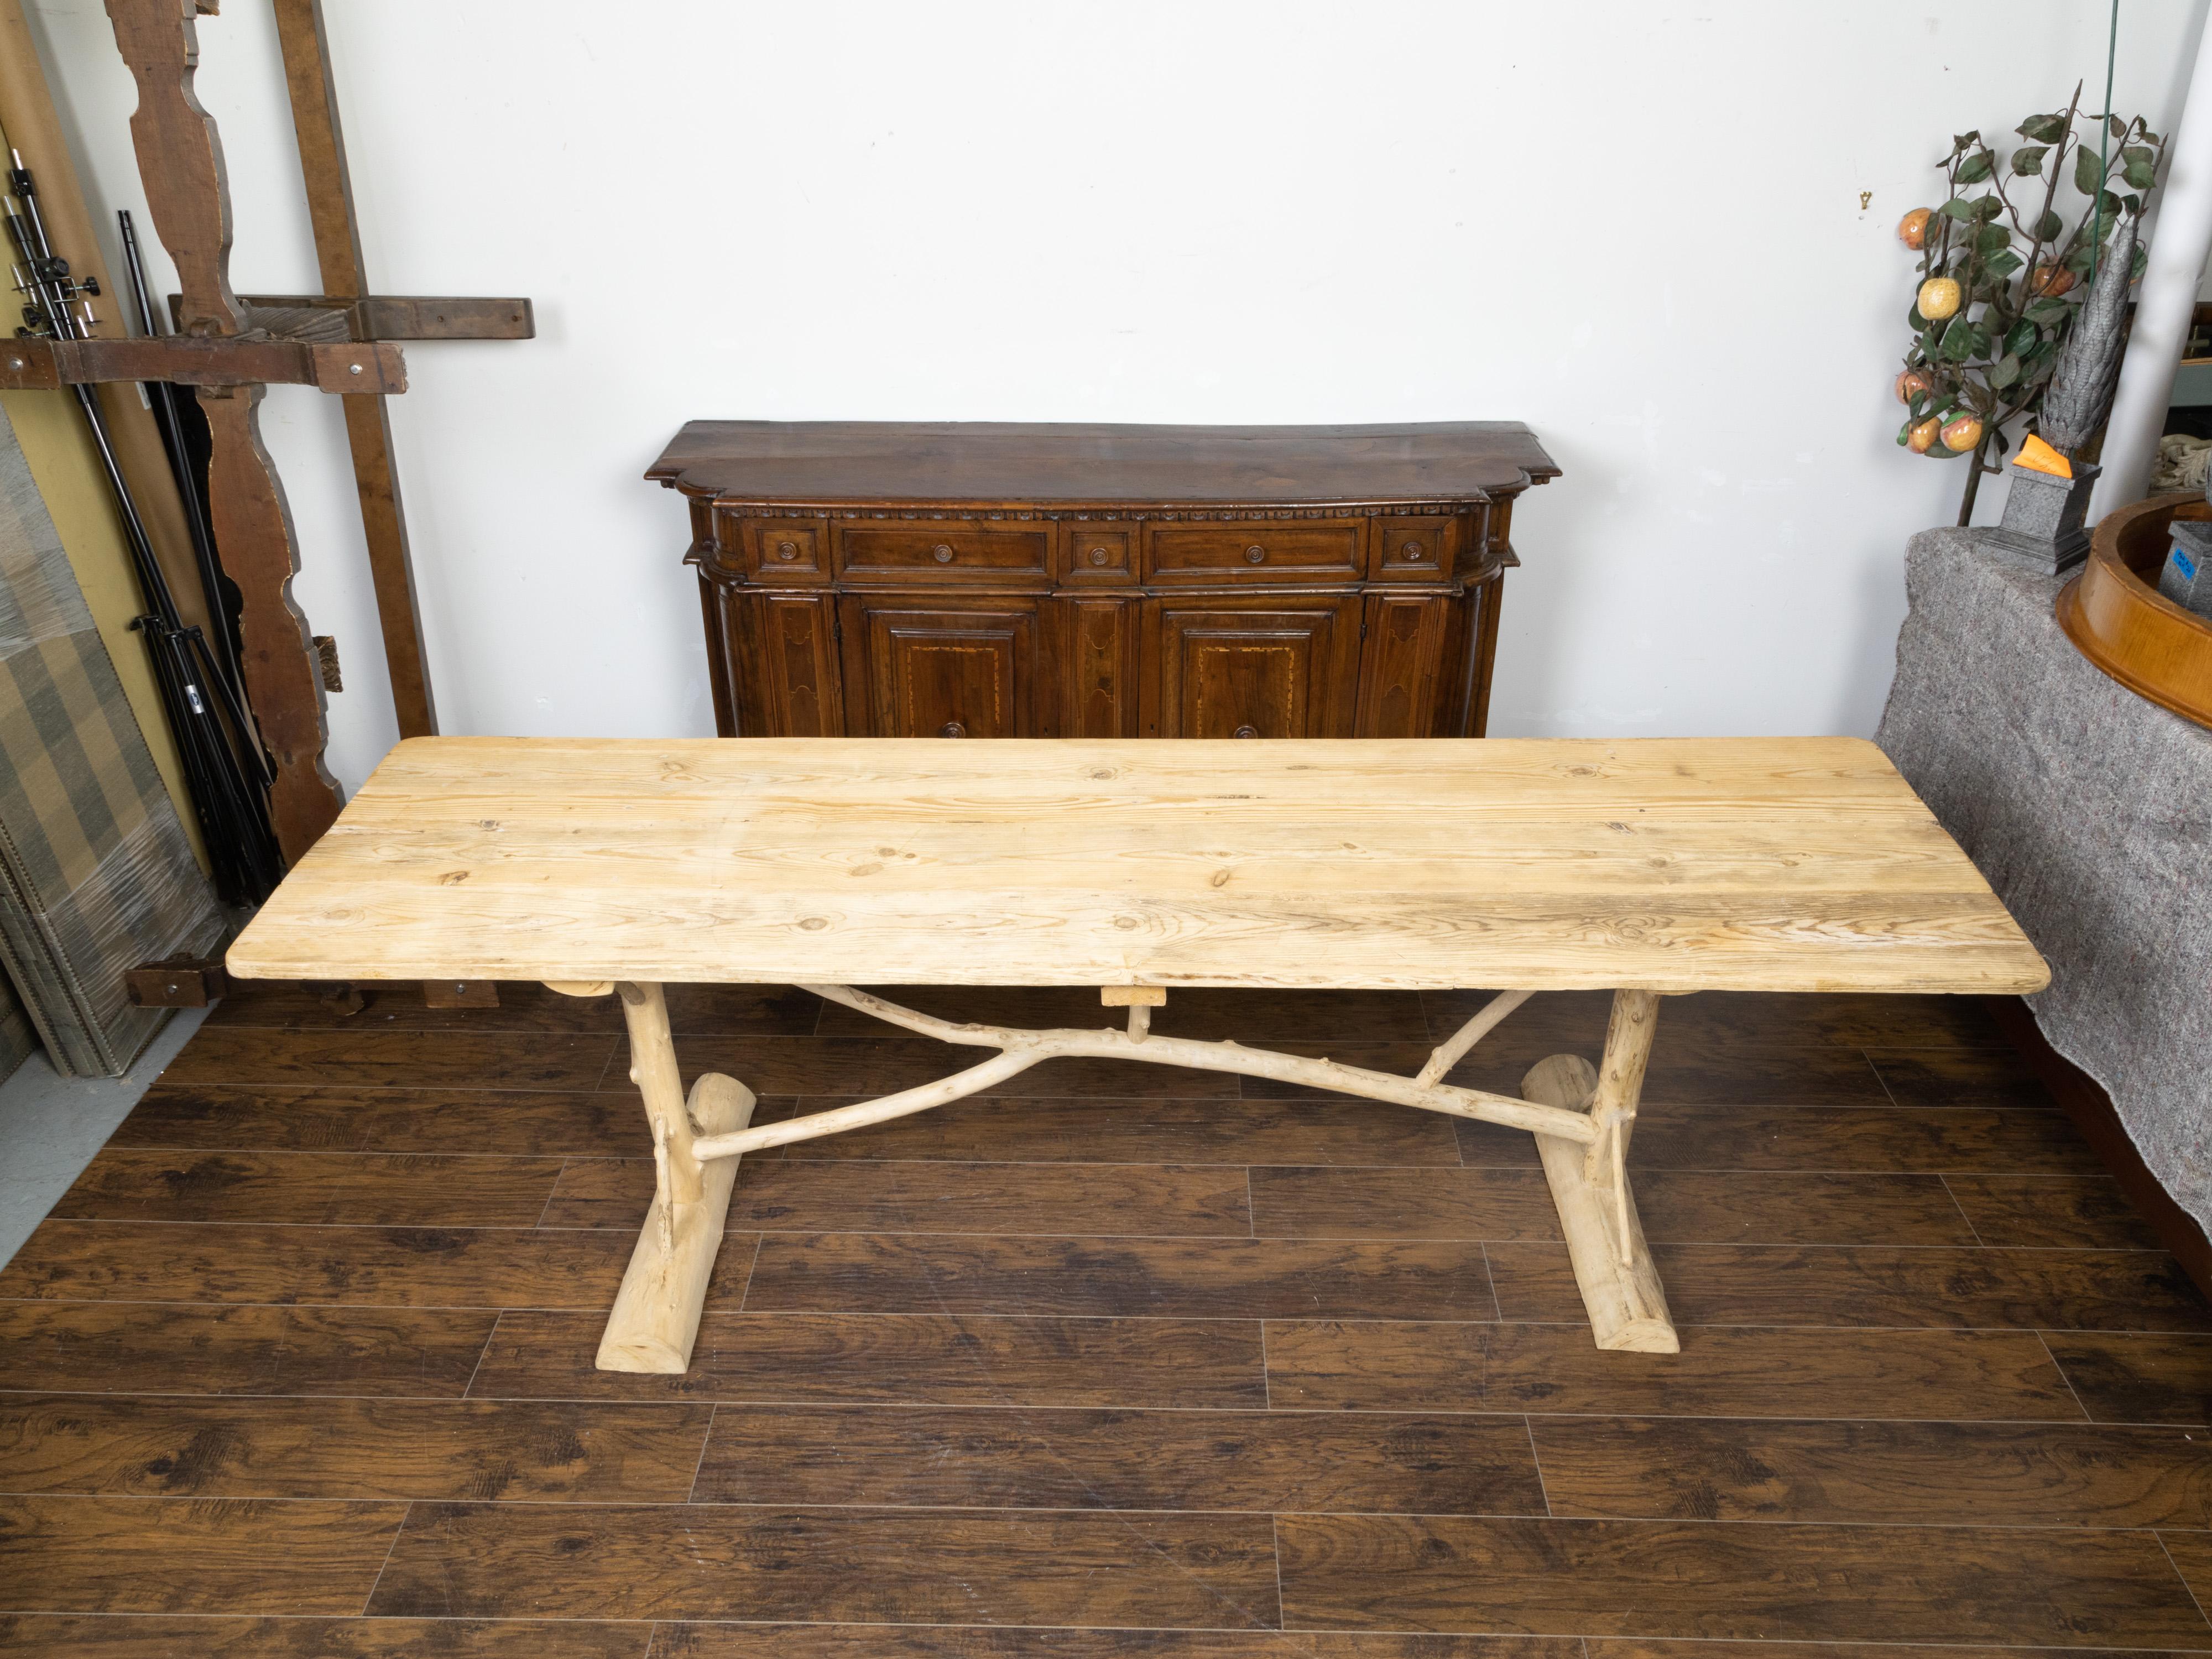 A French pine farm table from the mid 20th century, with twig trestle base. Created in France during the midcentury period, this farm table features a rectangular planked pine top sitting above an unusual twig trestle base. Boasting a nicely